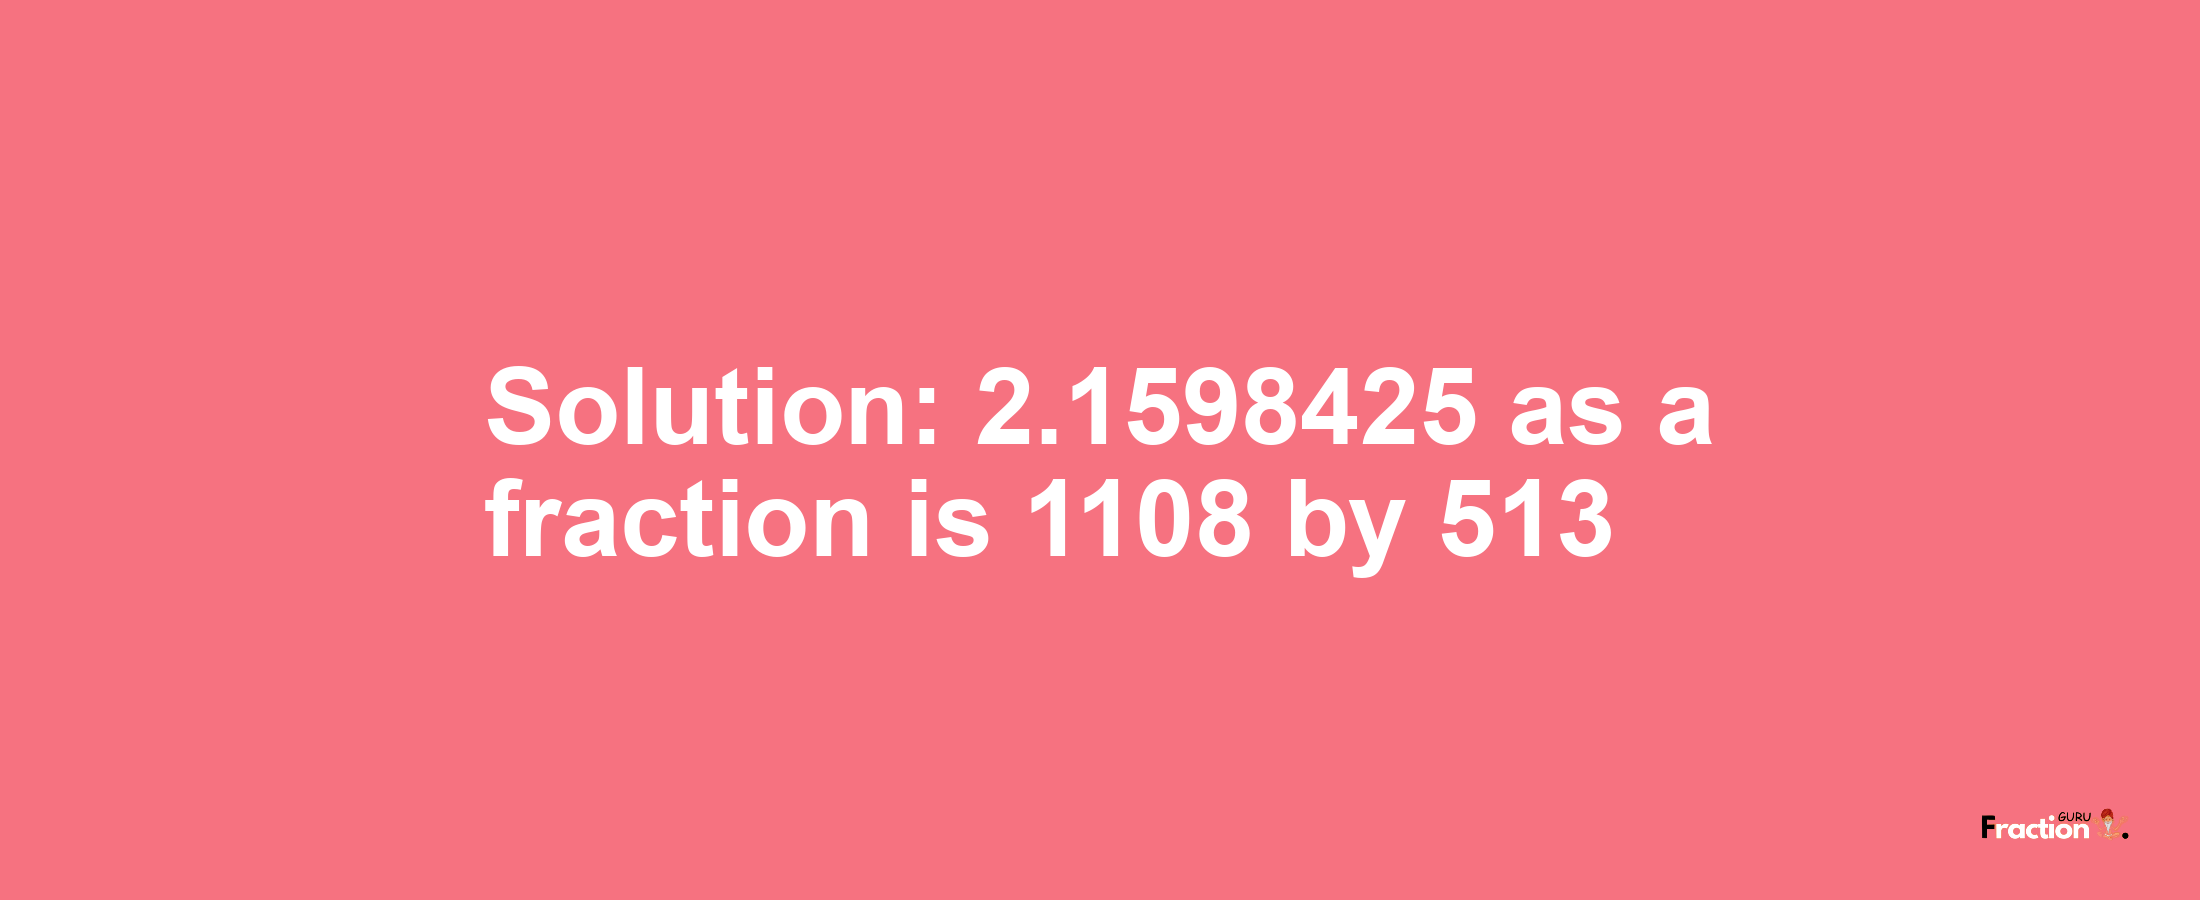 Solution:2.1598425 as a fraction is 1108/513